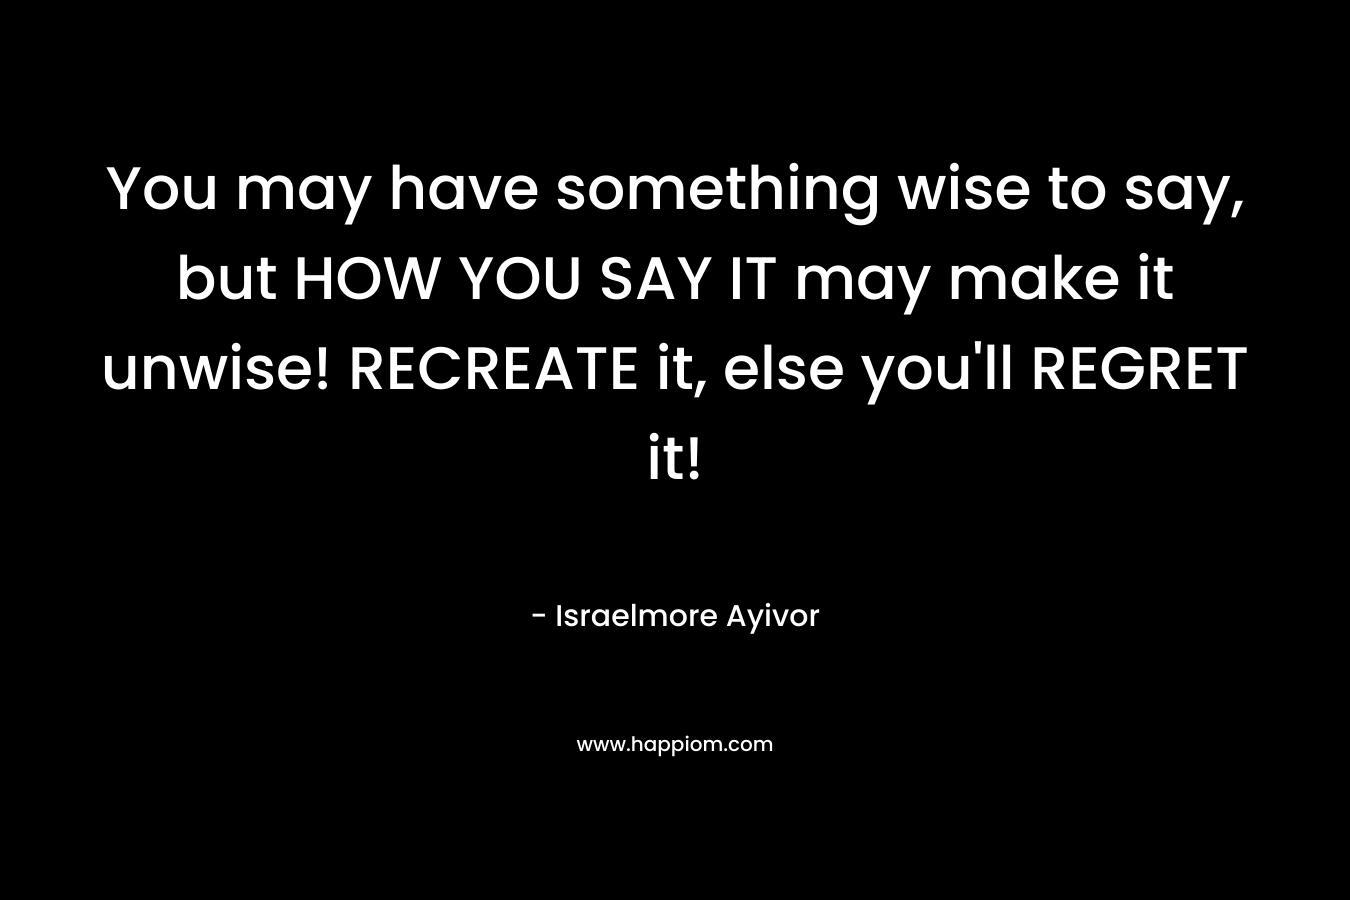 You may have something wise to say, but HOW YOU SAY IT may make it unwise! RECREATE it, else you’ll REGRET it! – Israelmore Ayivor